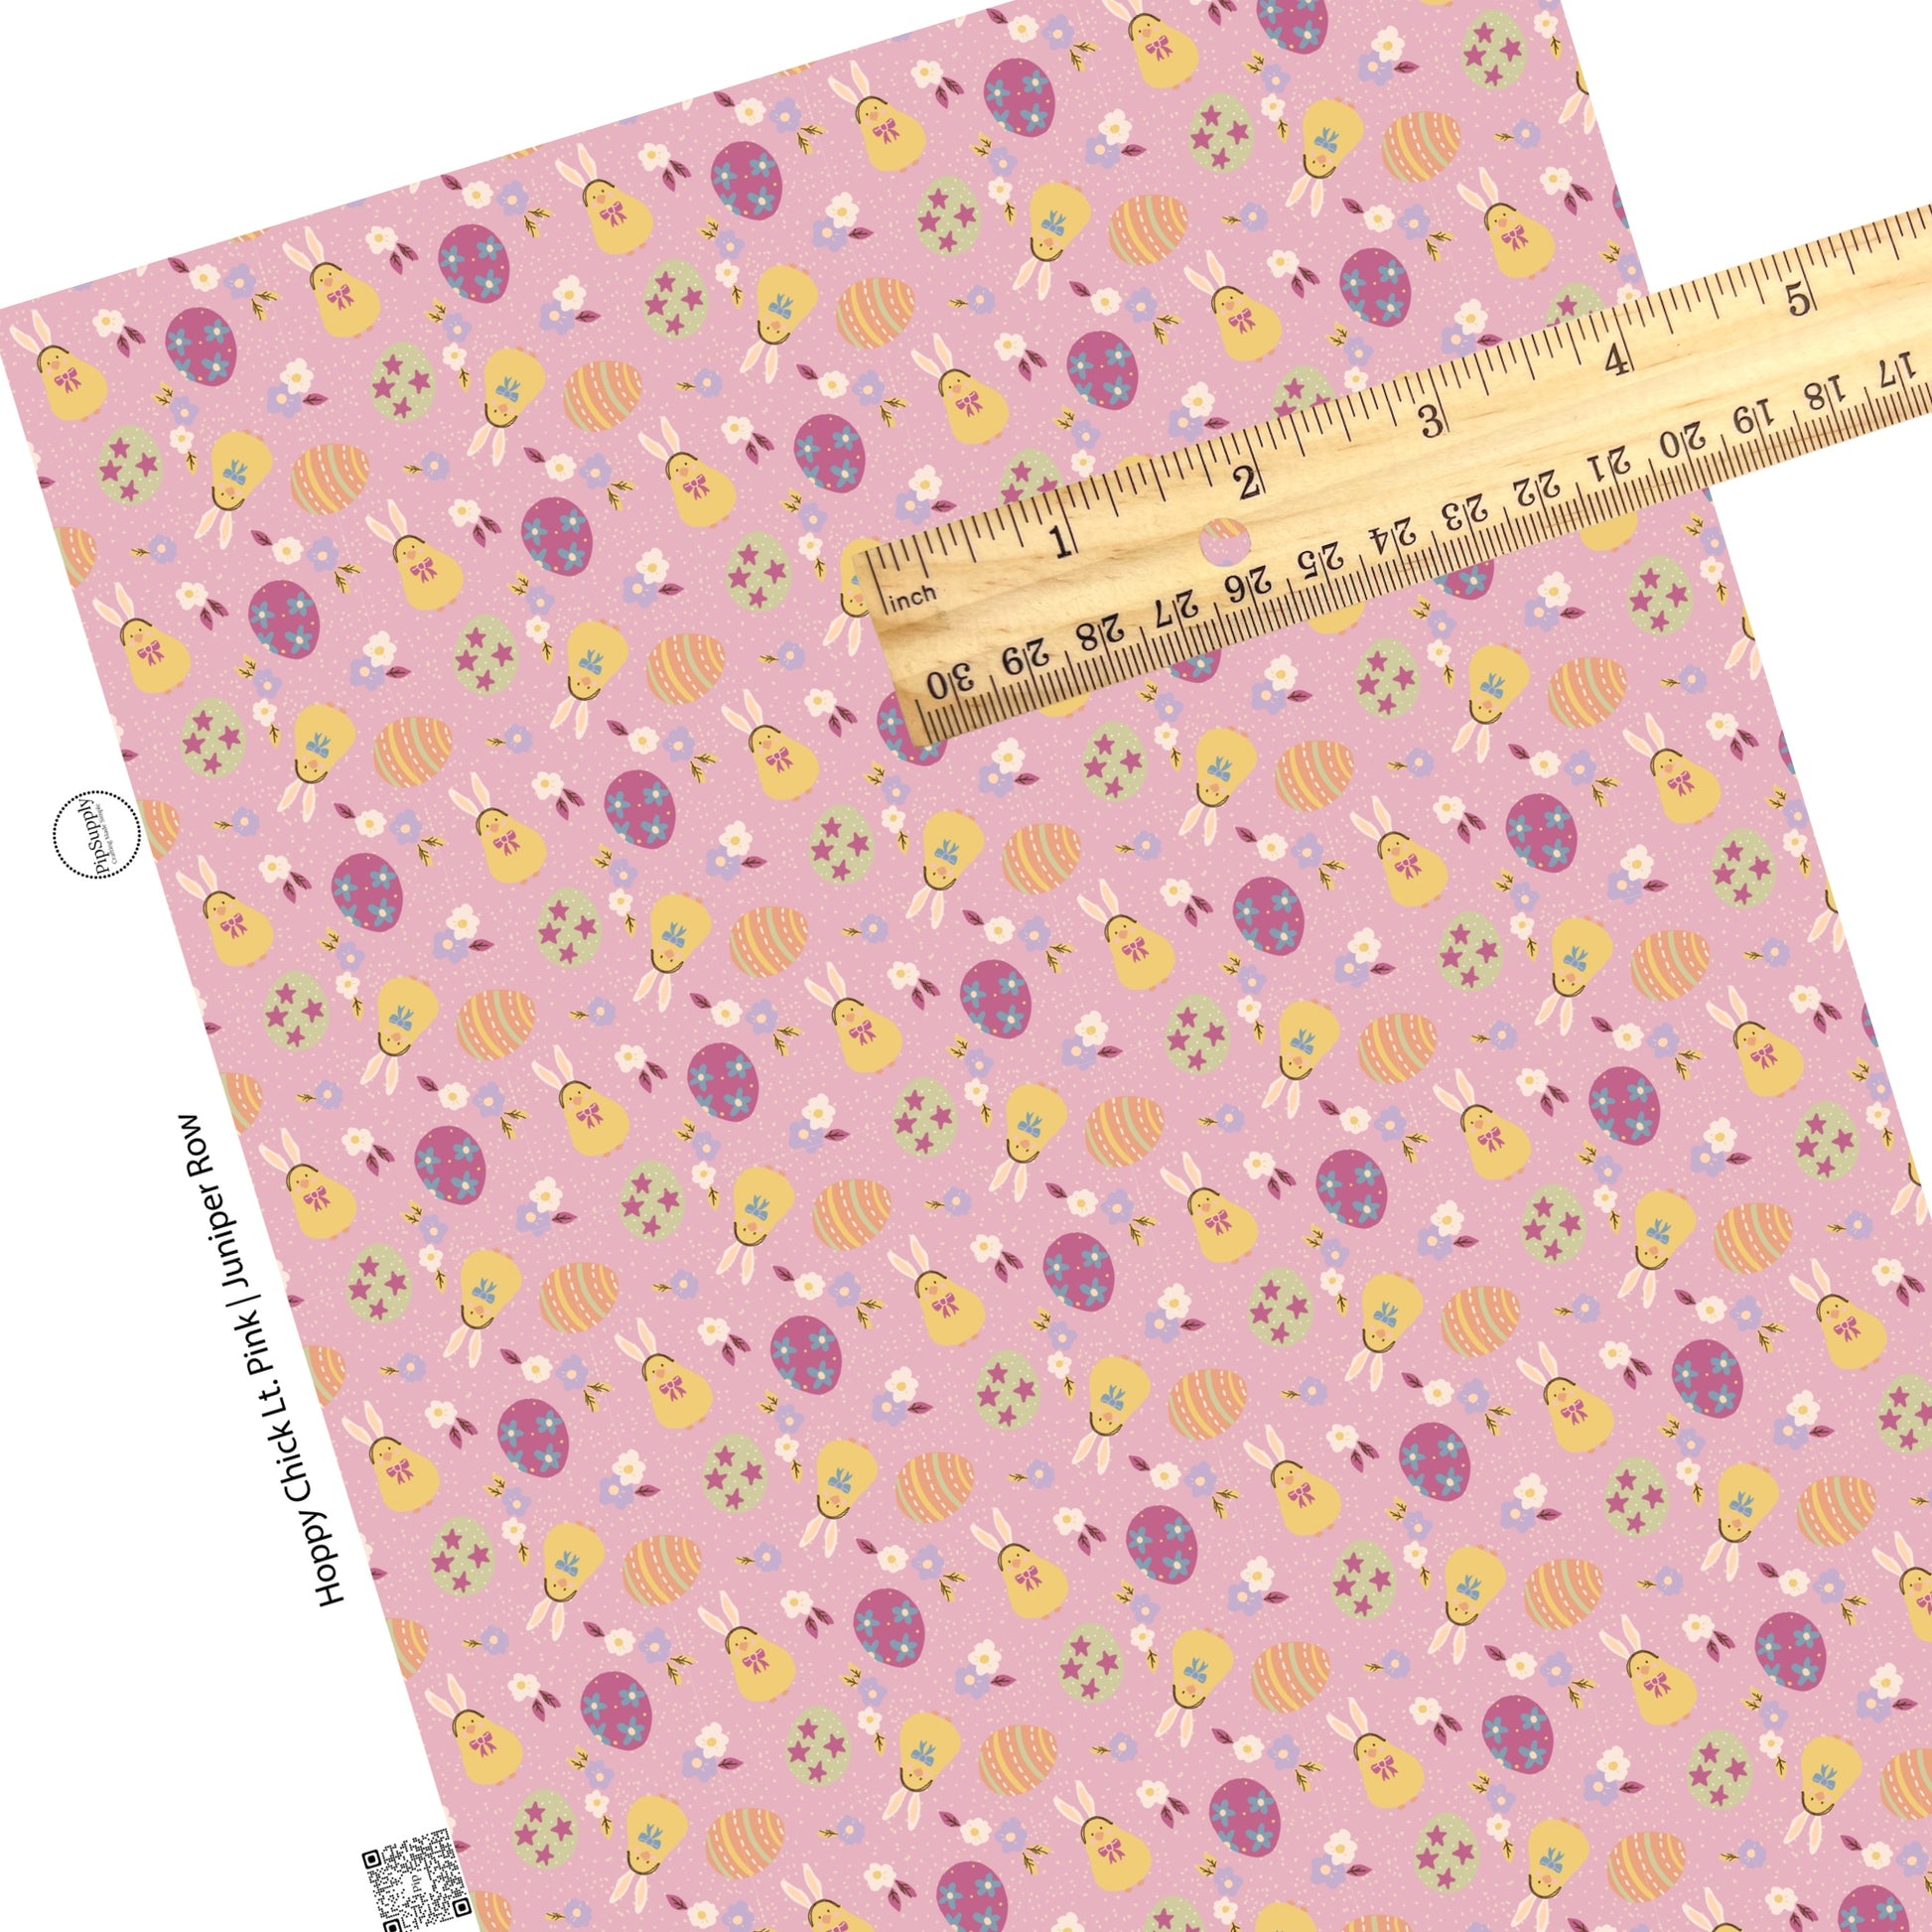 Flowers on green and purple eggs, stripes on orange eggs, purple and cream flowers, and yellow chicks on polka dot mauve faux leather sheets